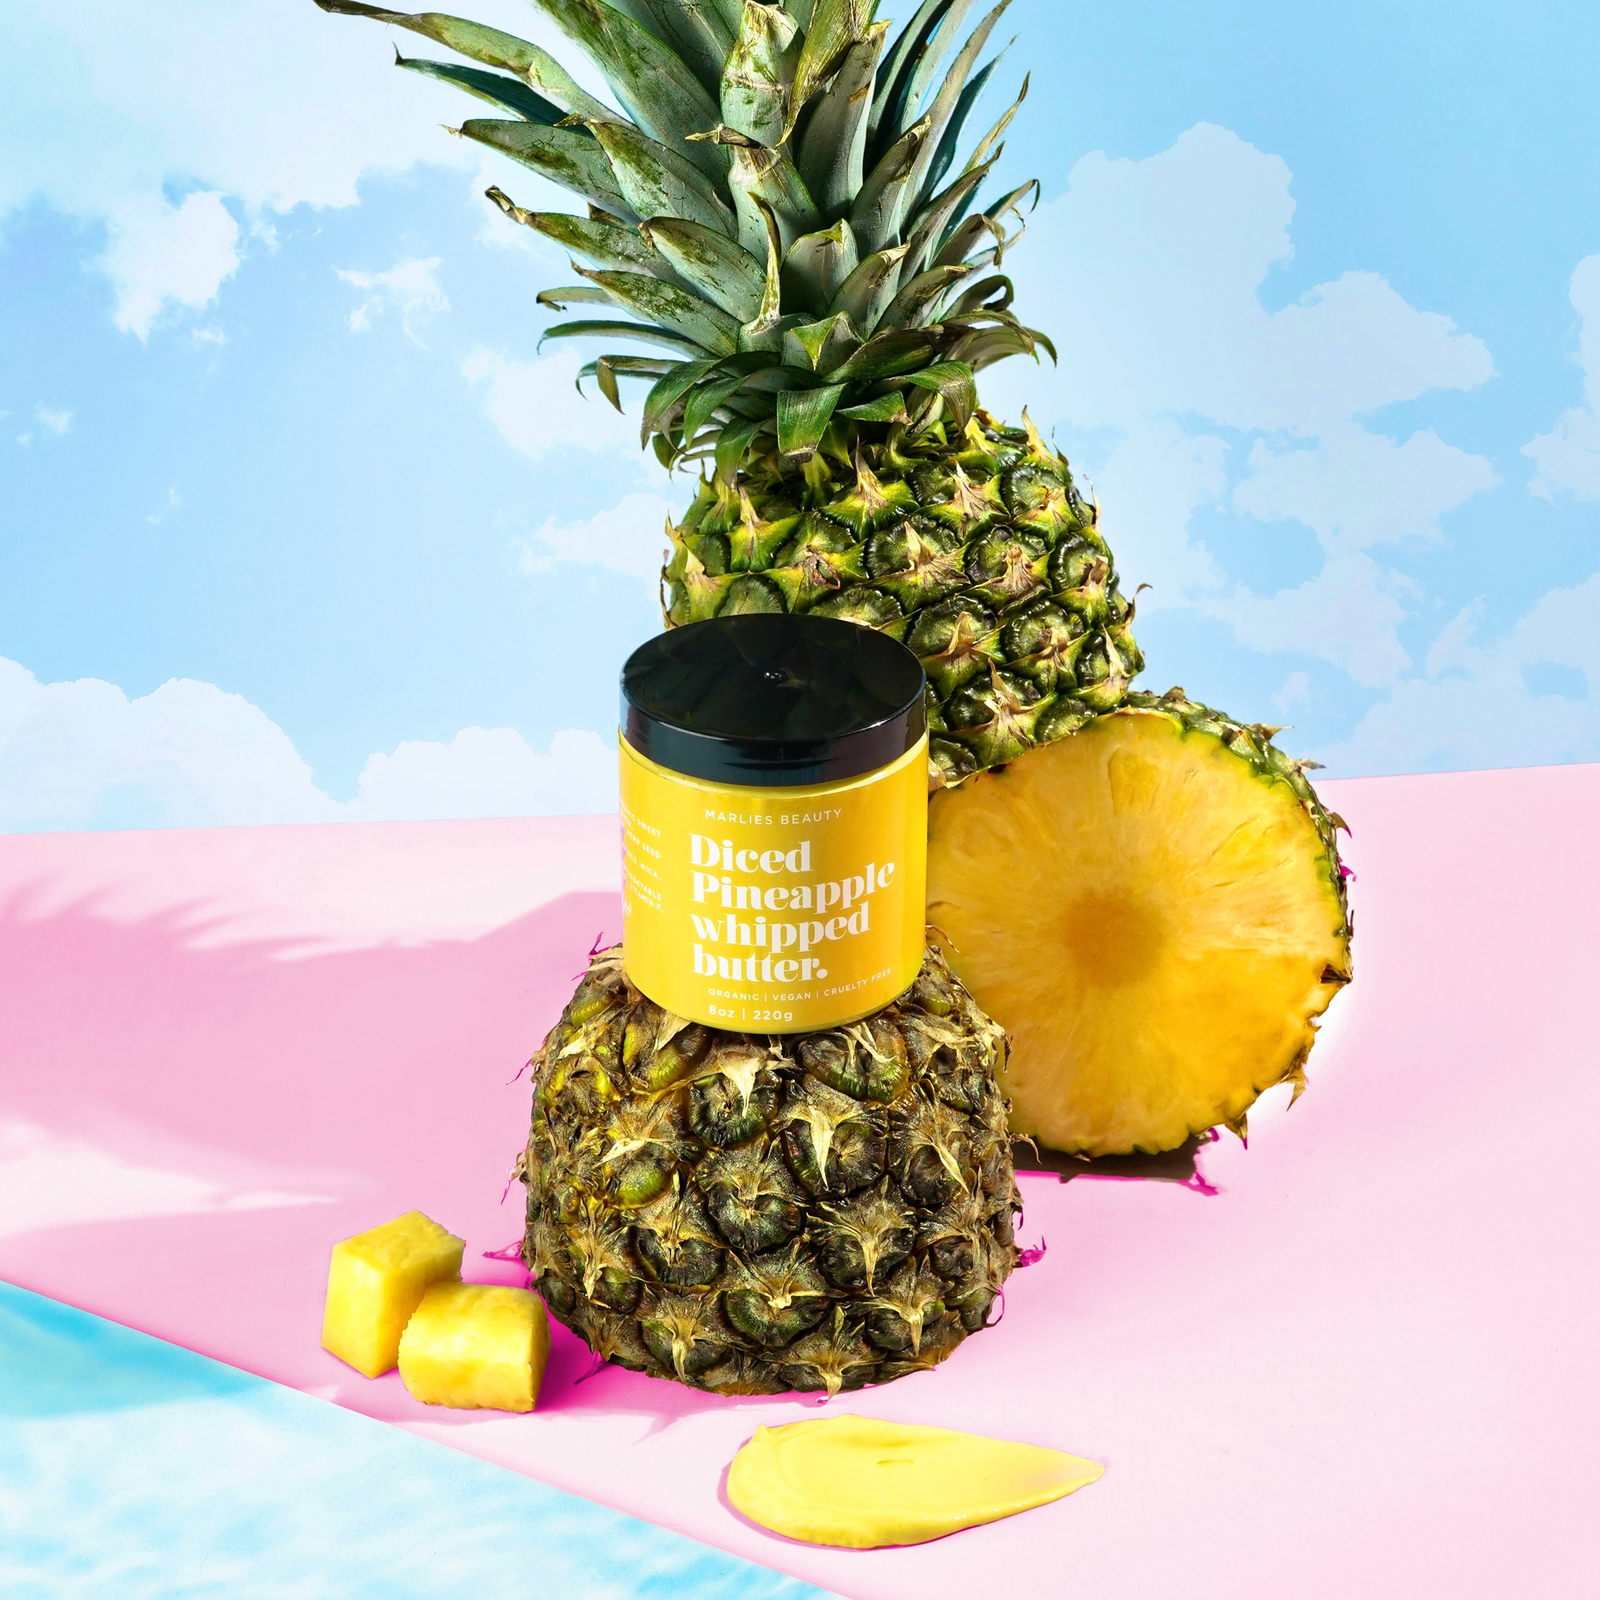 Diced Pineapple Whipped Body butter